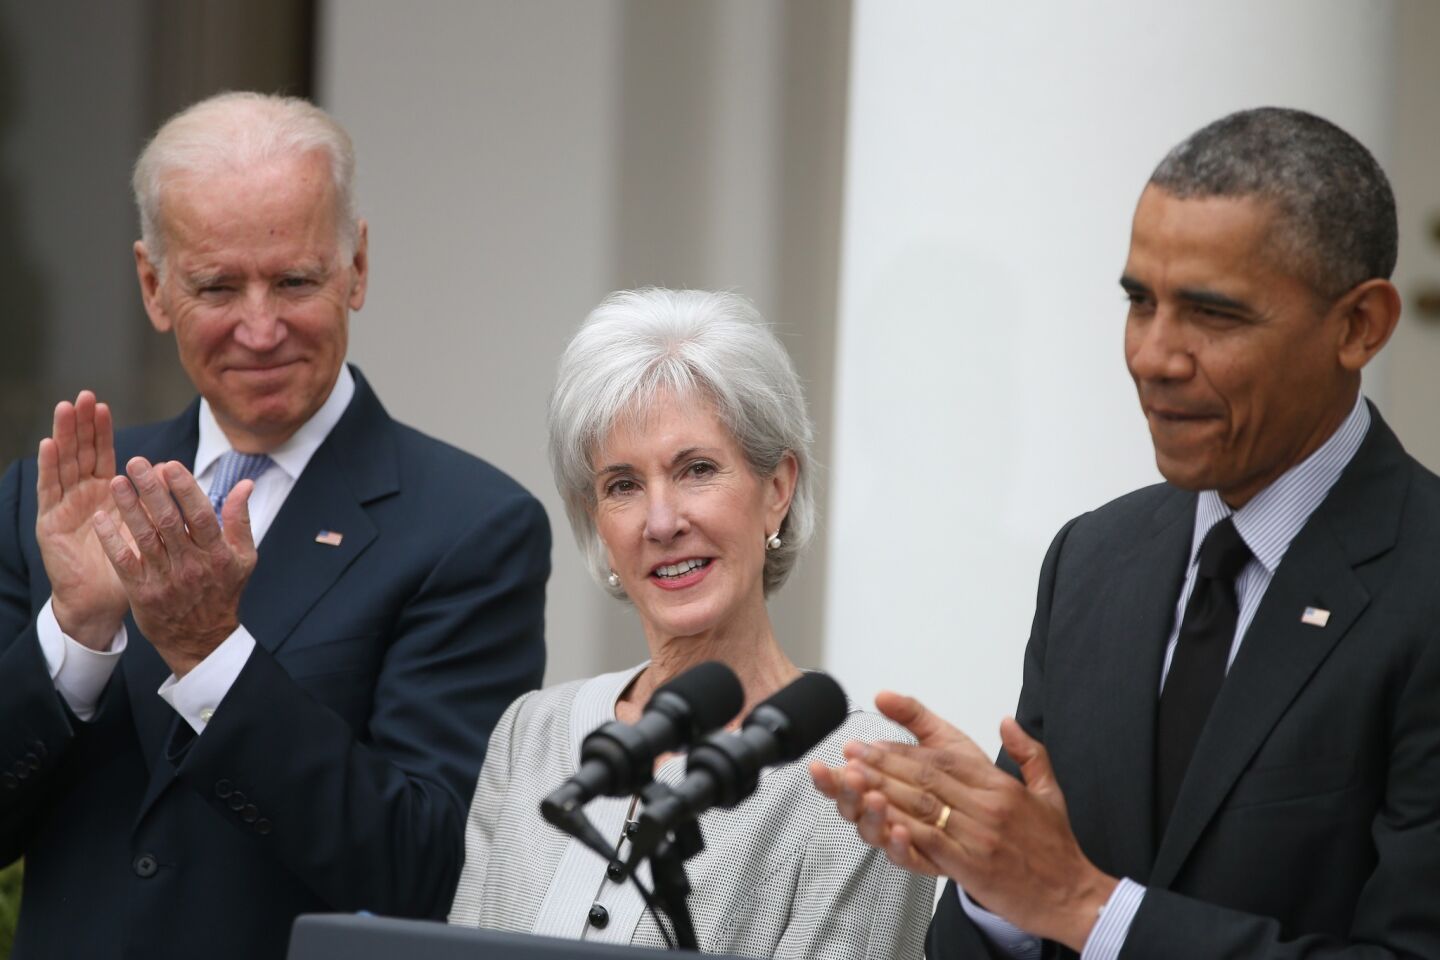 Sebelius is out